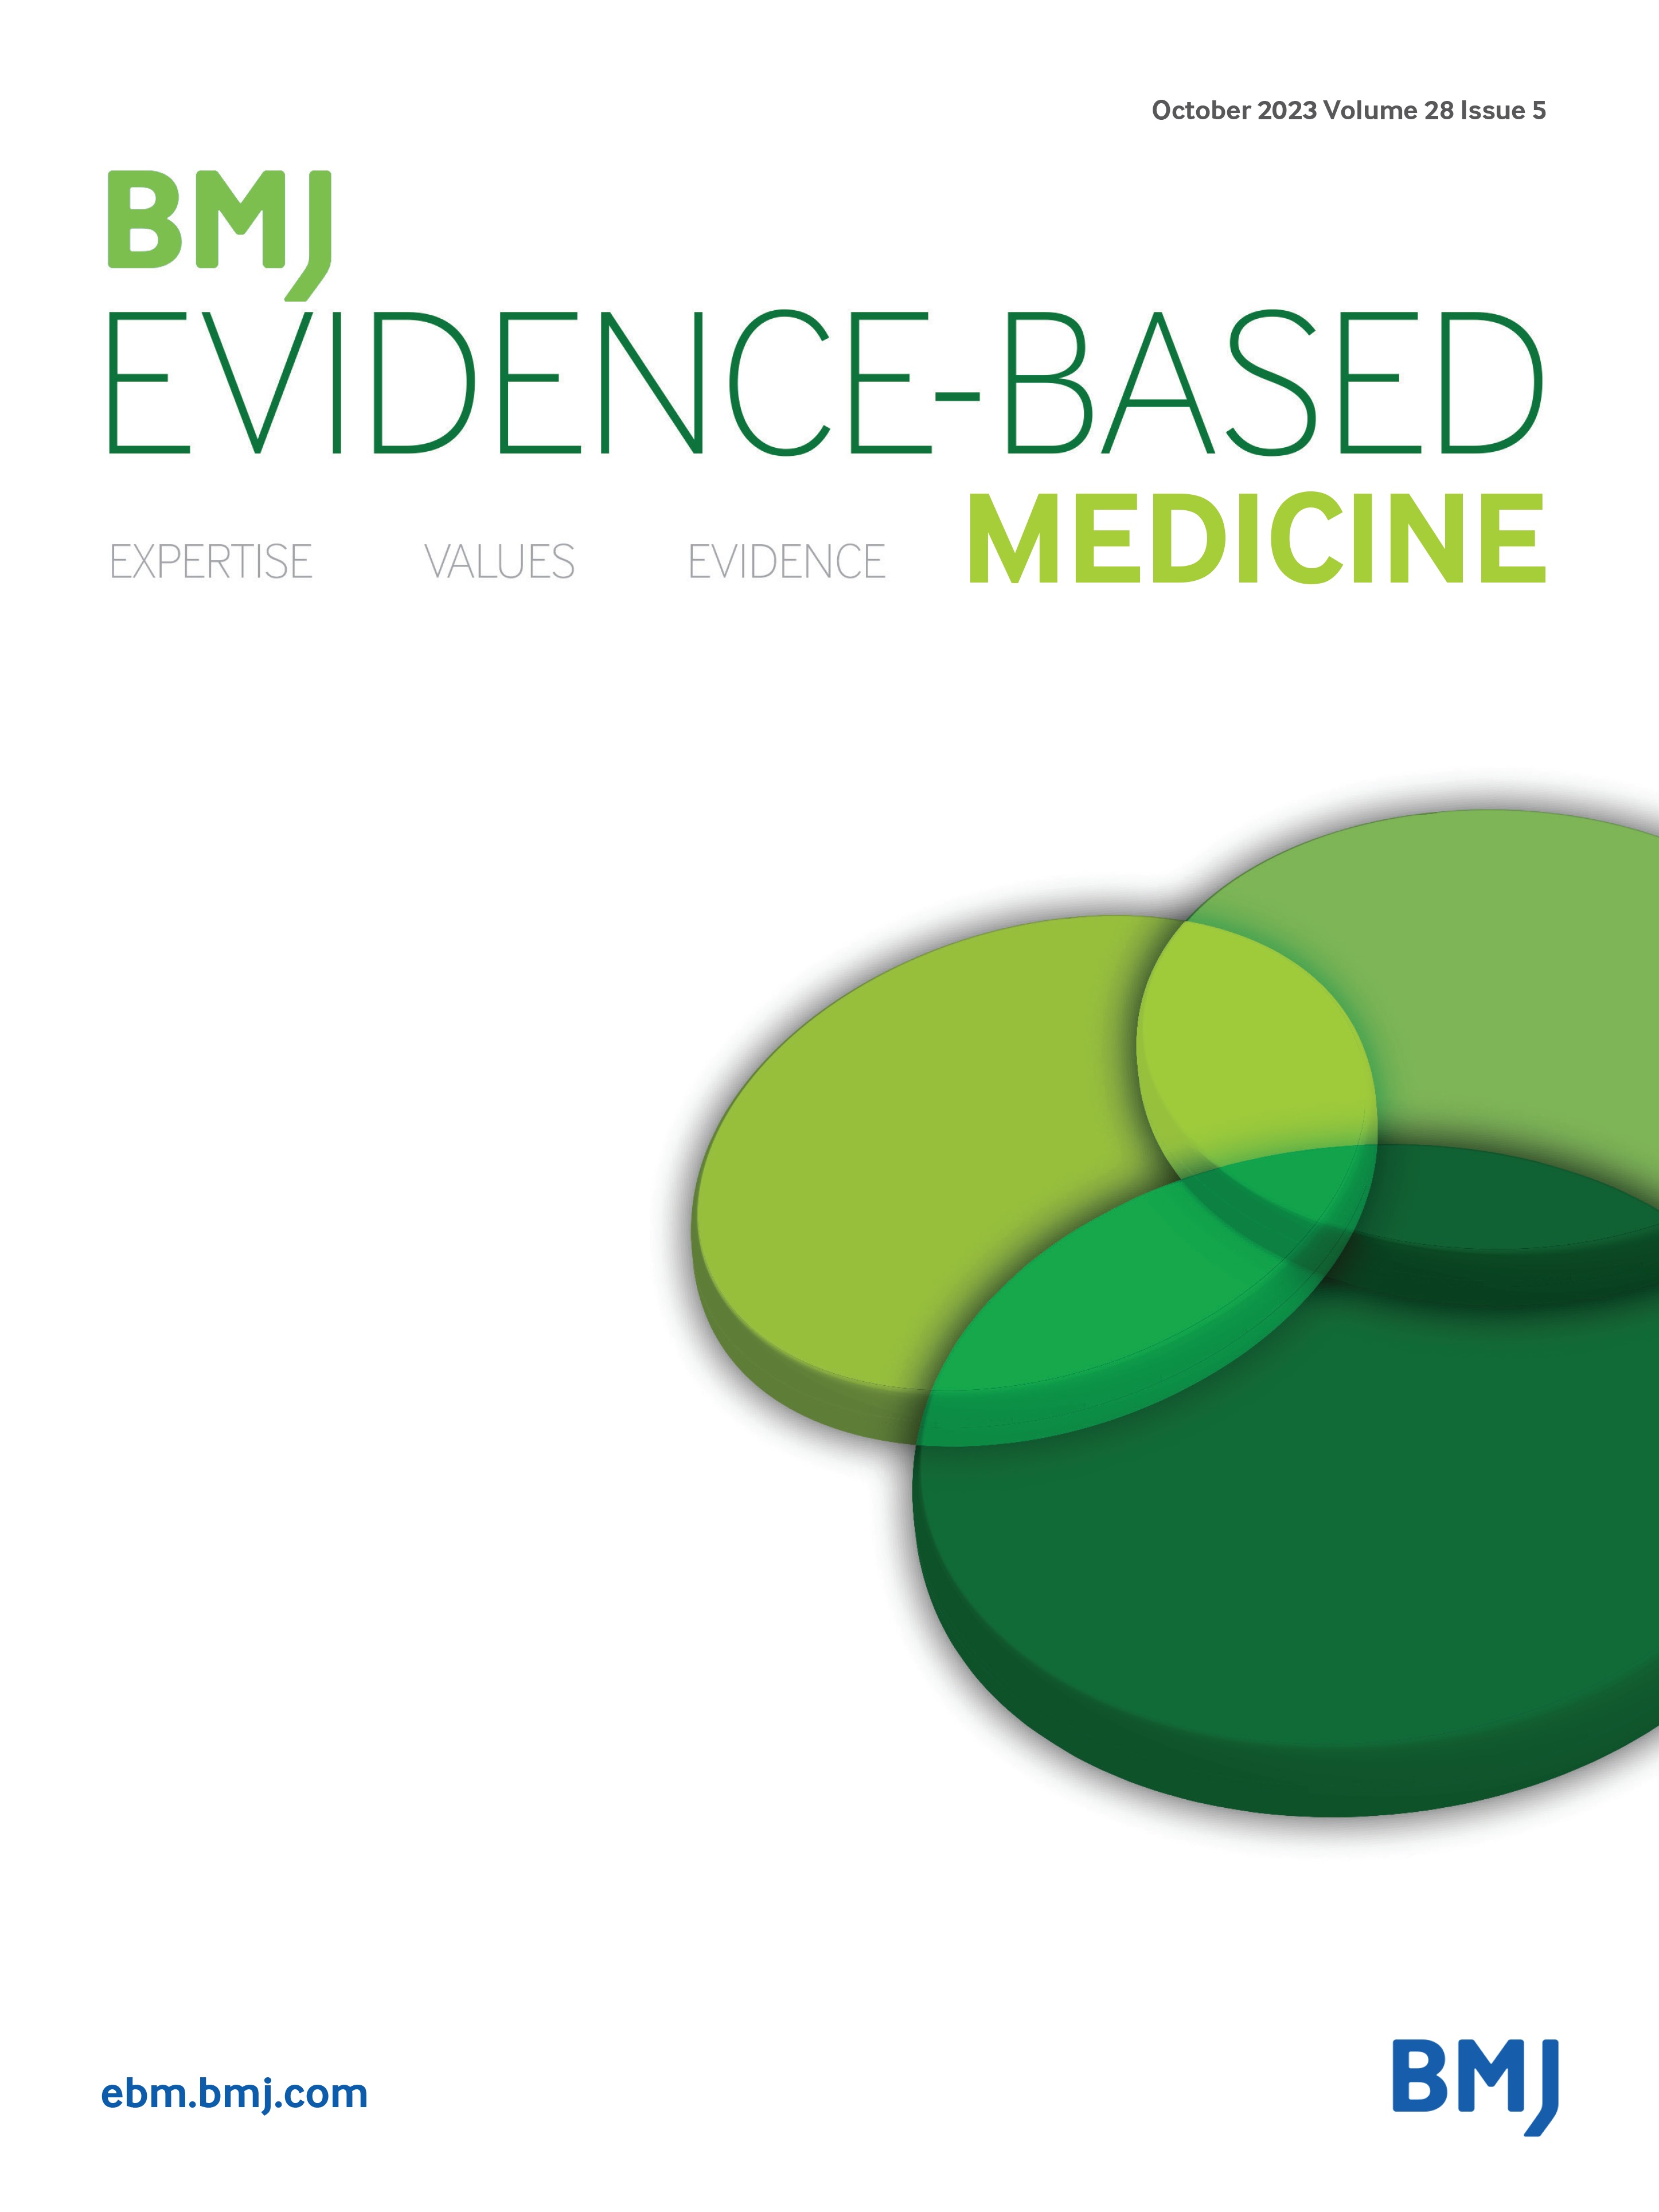 Challenges to delivering evidence-based management for long COVID